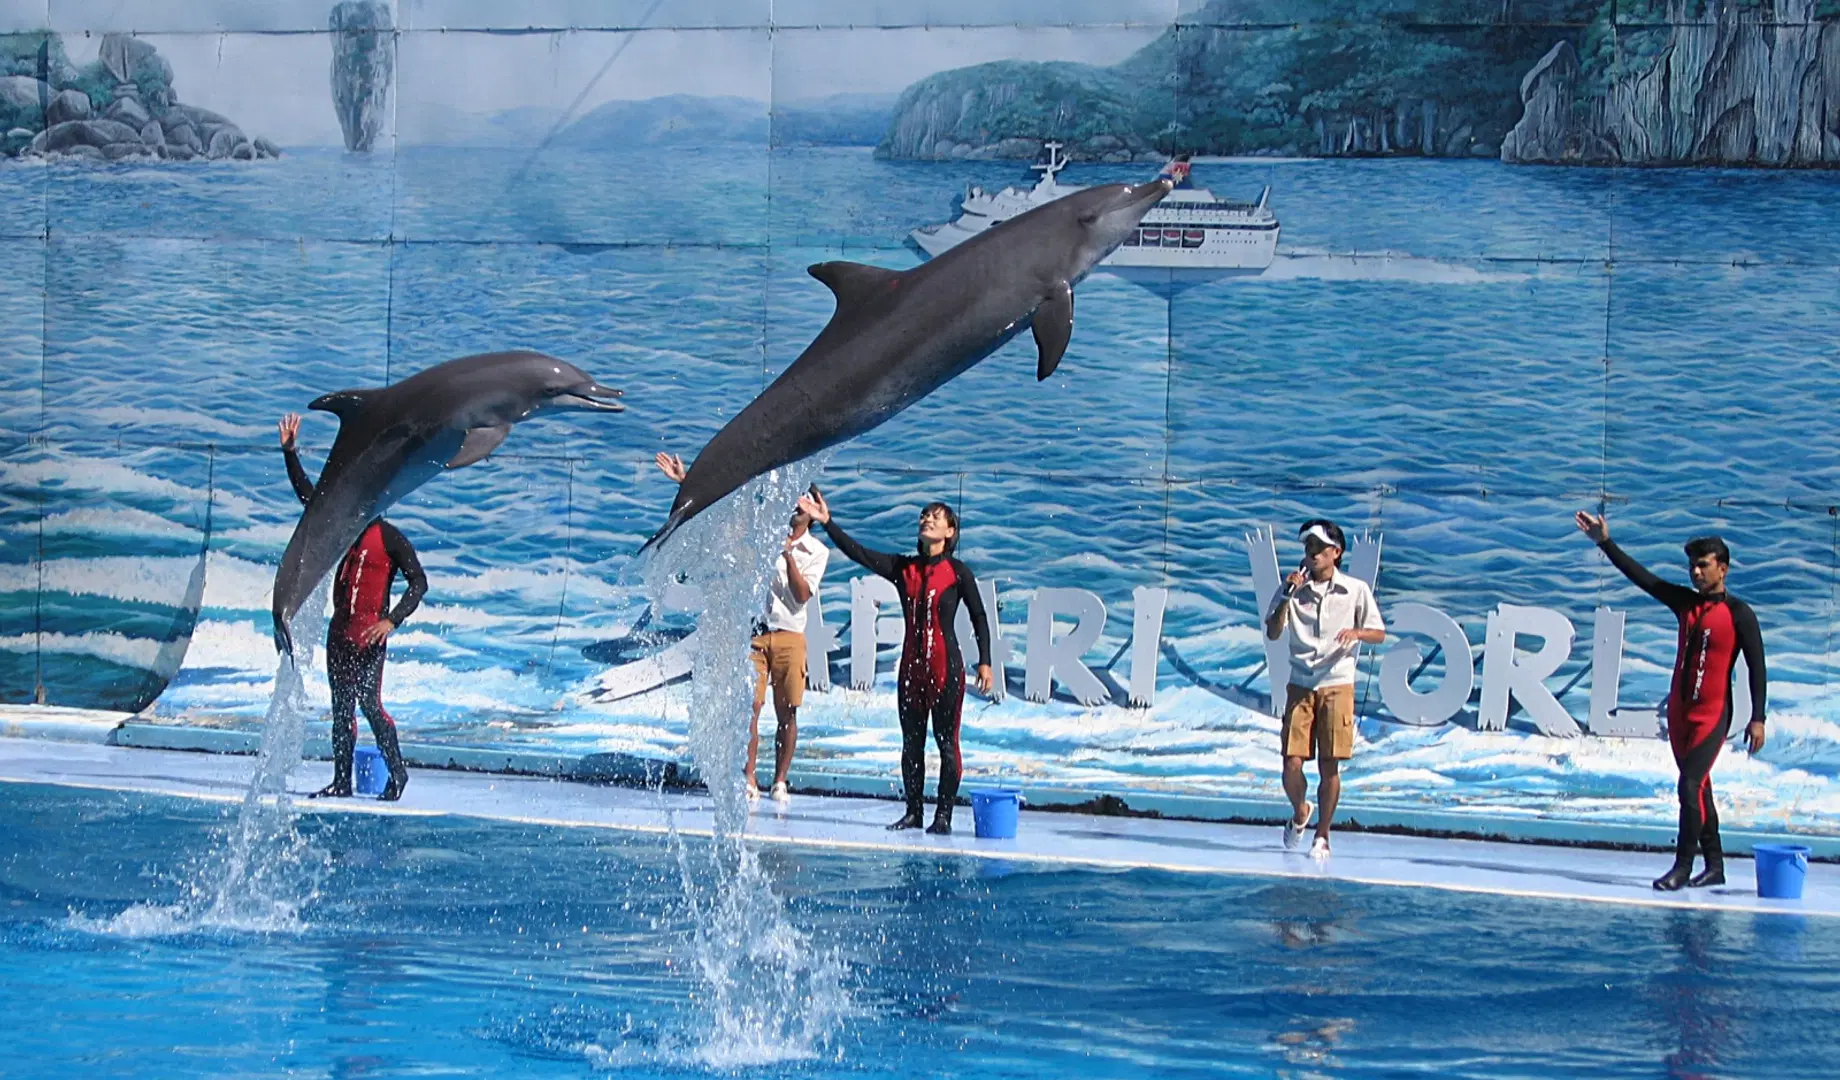 A Dolphin Show is quite popular activity in Safari World, Bangkok